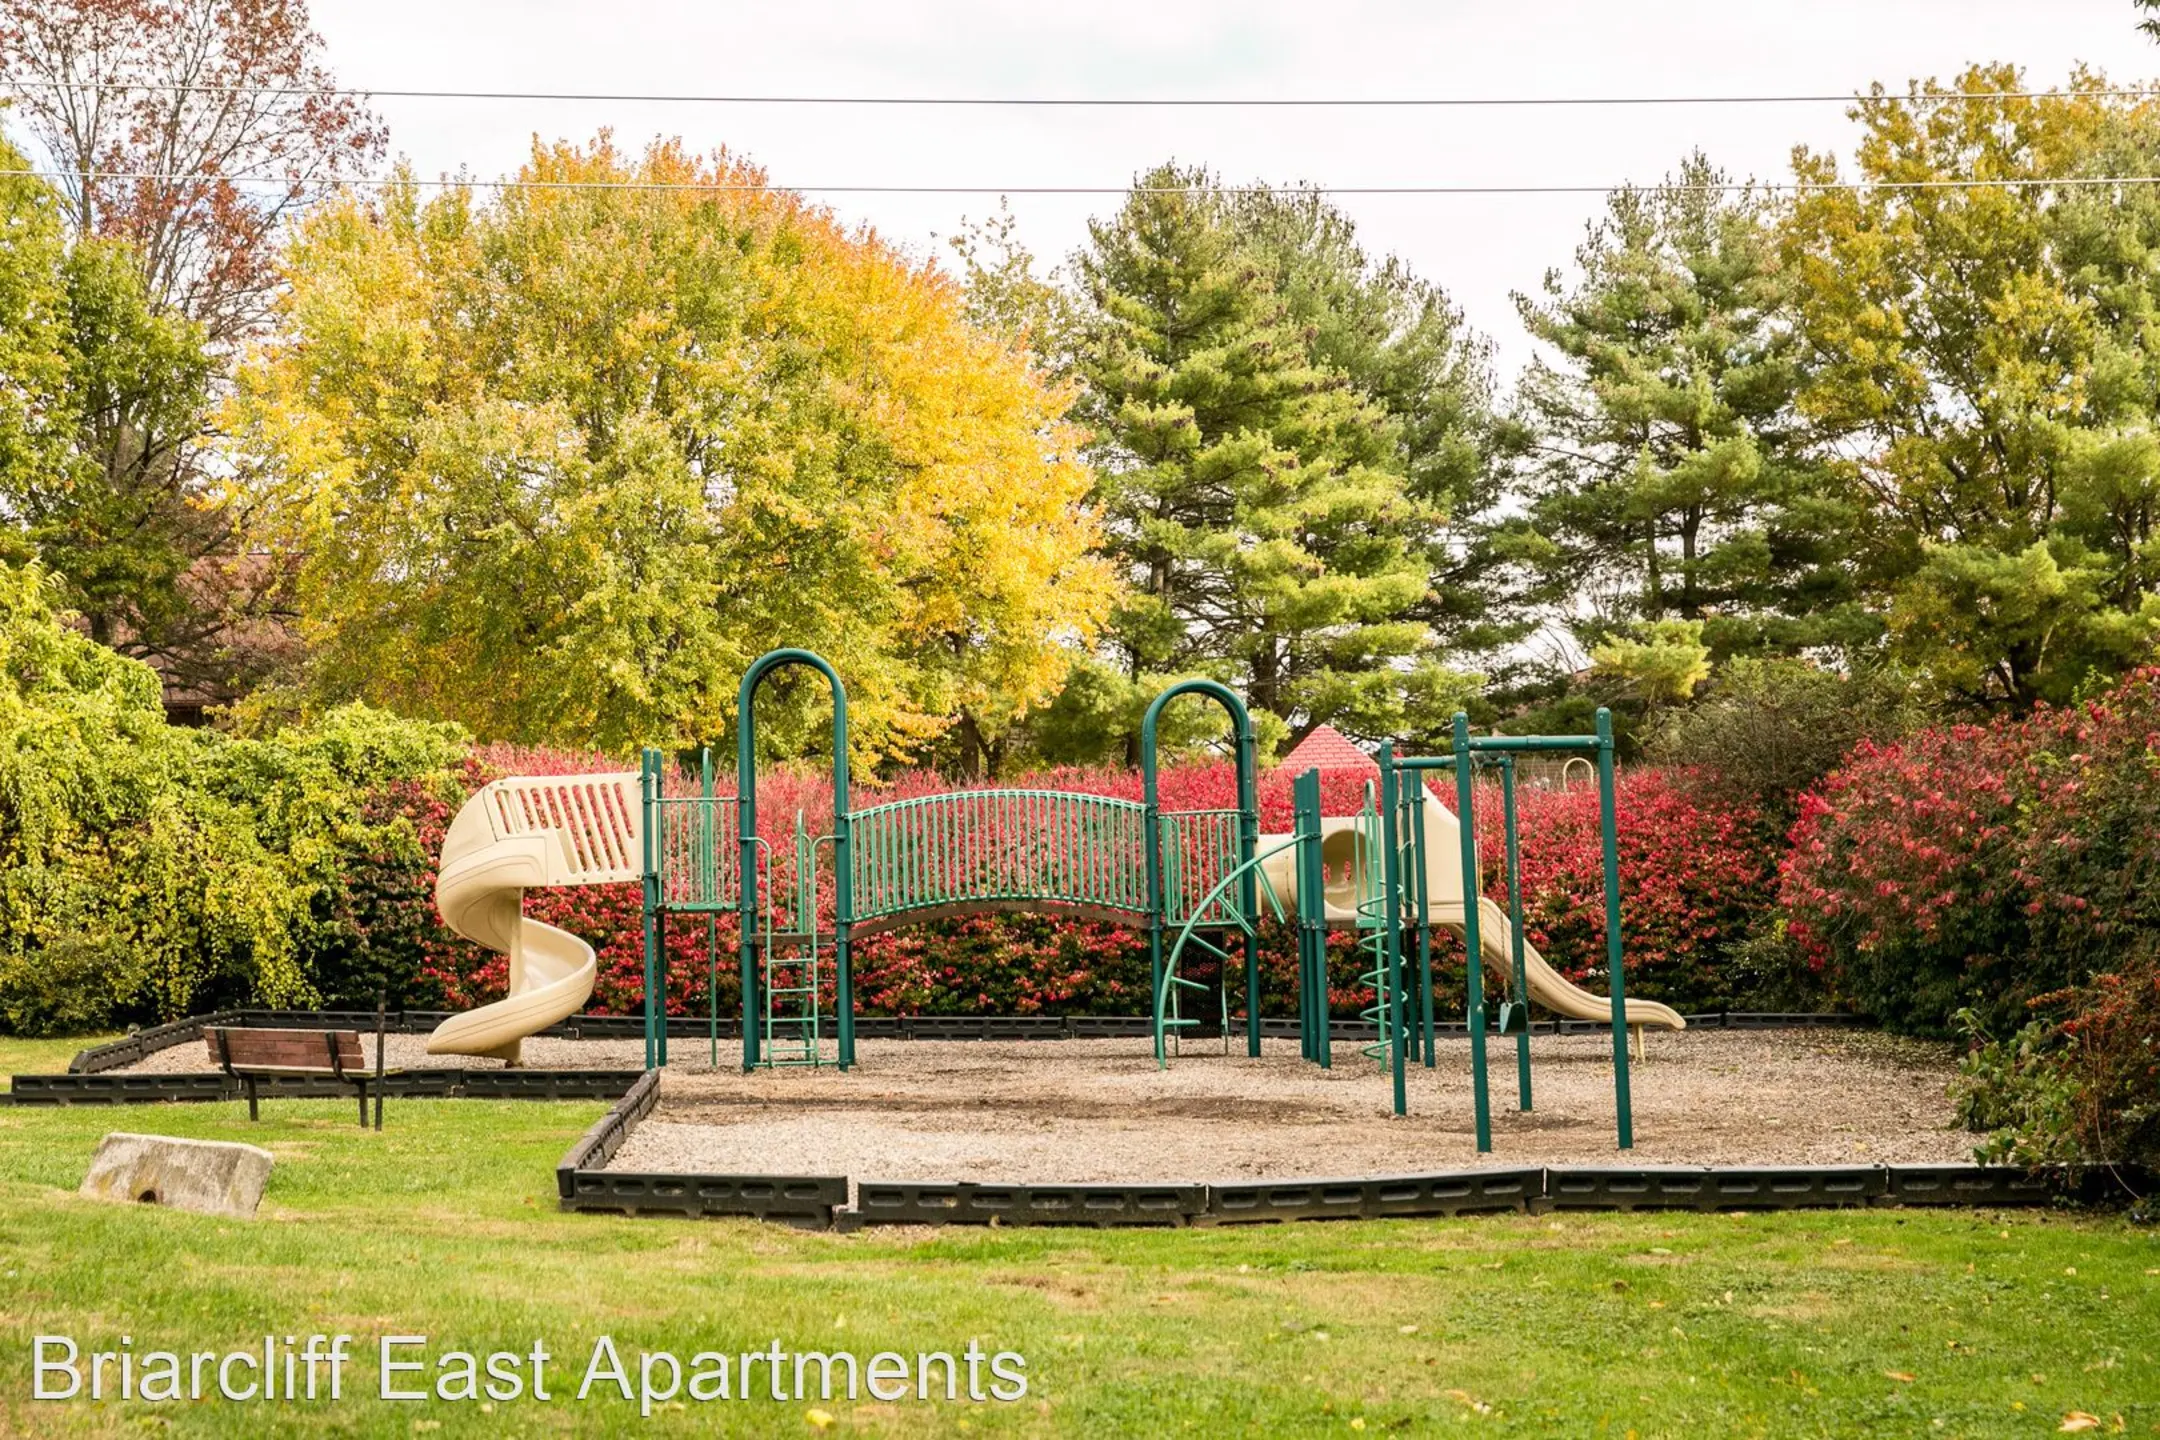 Playground - Briarcliff Apartments - Cockeysville, MD